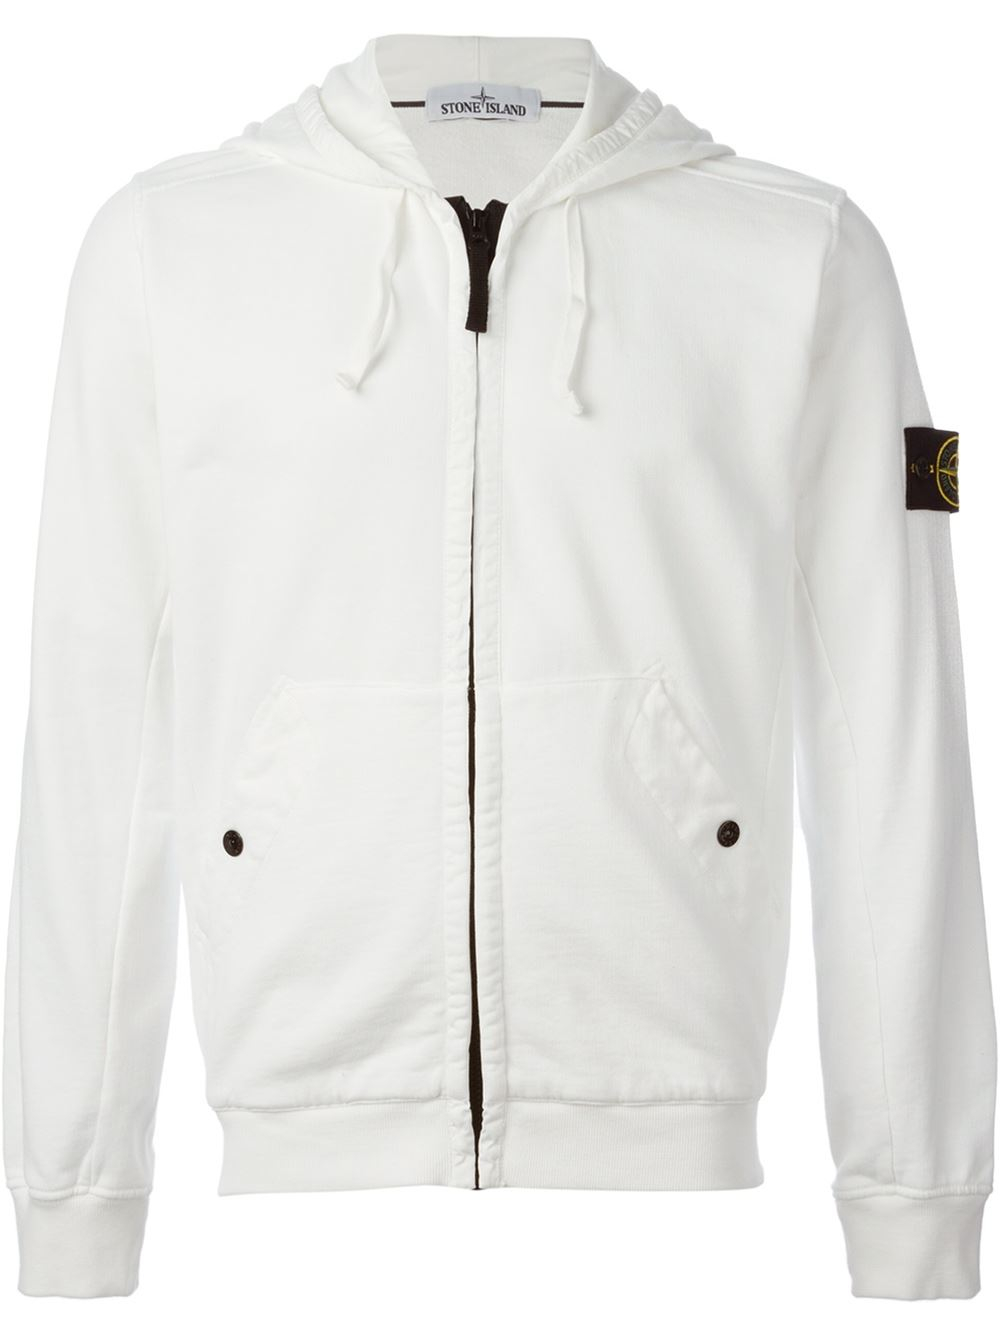 Stone Island Zipped Hoodie in White for Men - Lyst